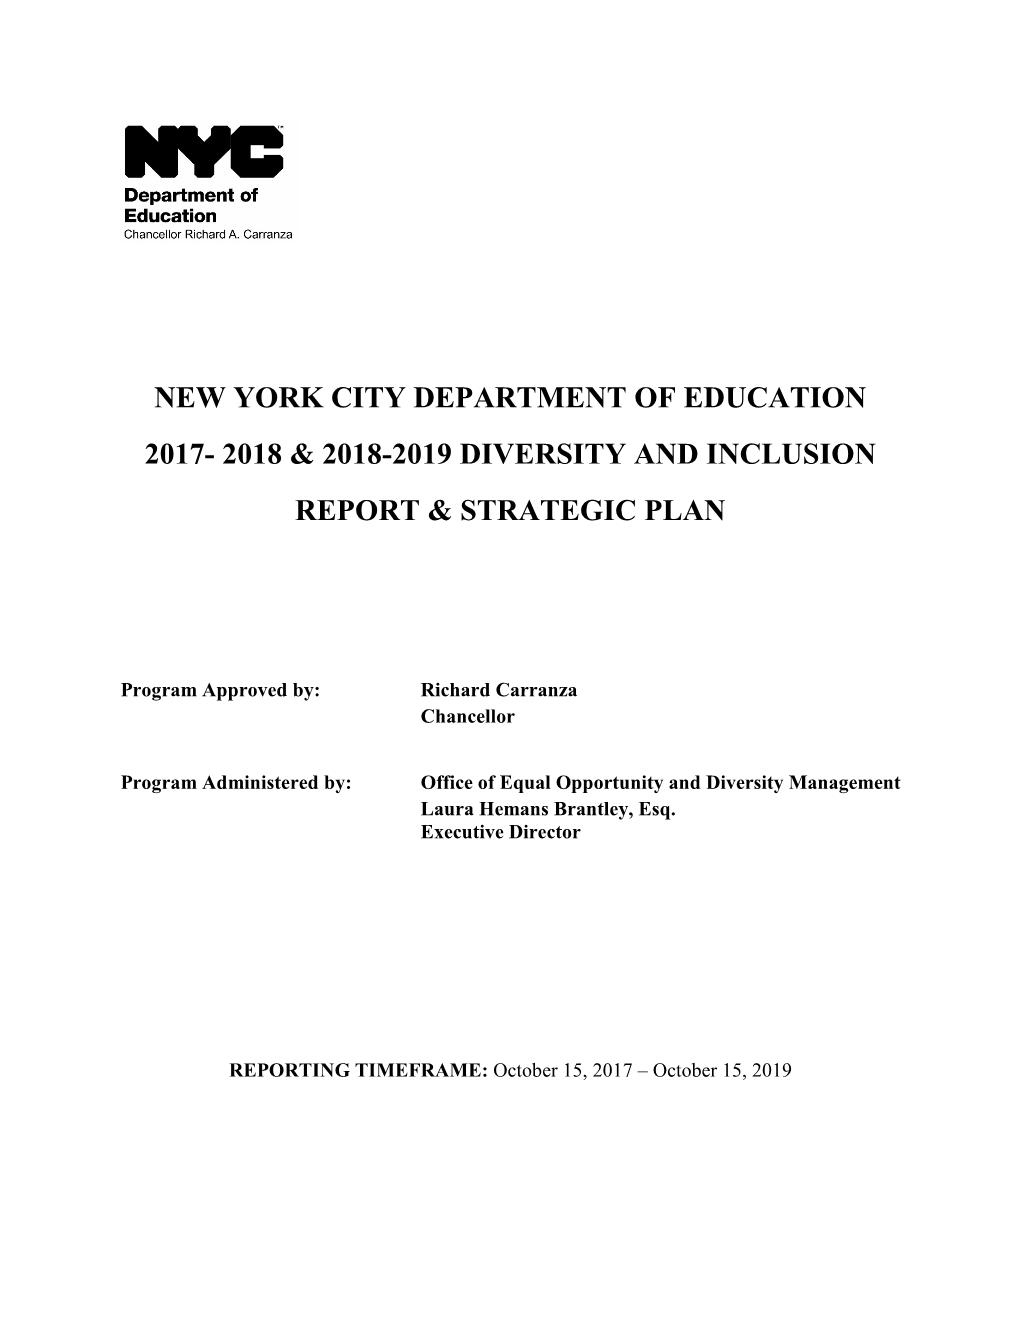 NYC DOE 2017-2019 Diversity and Inclusion Annual Report and Strategic Plan